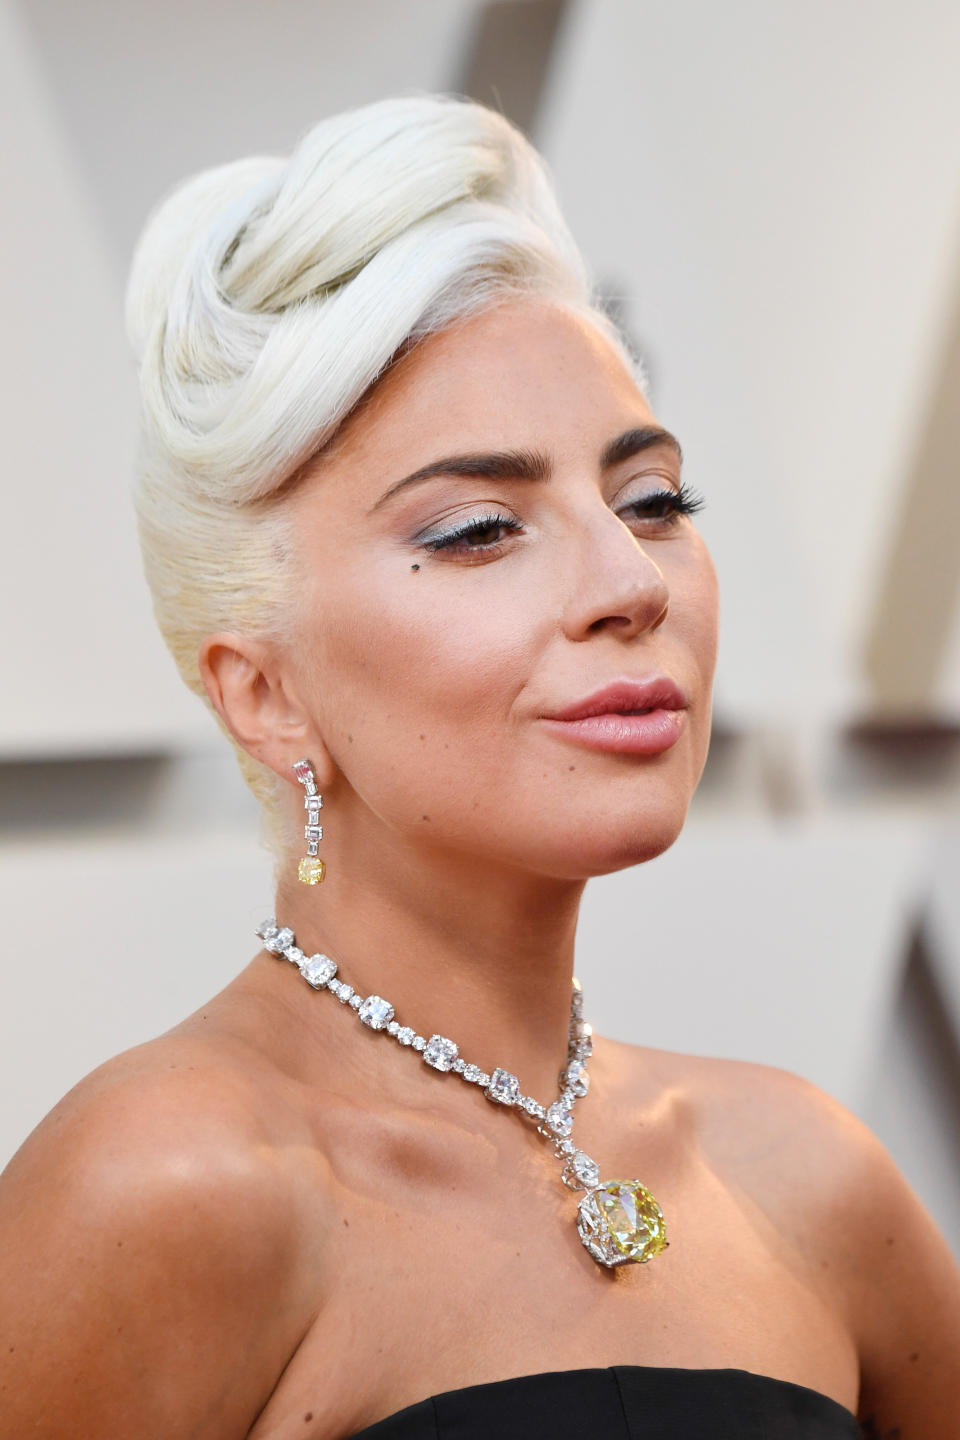 Lady Gaga at the Oscars in Los Angeles on Feb. 24. Makeup by <a href="https://www.instagram.com/p/BuSZFUEh80e/" target="_blank" rel="noopener noreferrer">Sarah Nicole Tanno﻿</a>. Hair by ﻿<a href="https://www.instagram.com/p/BuSkvgunGH5/" target="_blank" rel="noopener noreferrer">Frederic Aspiras</a>.